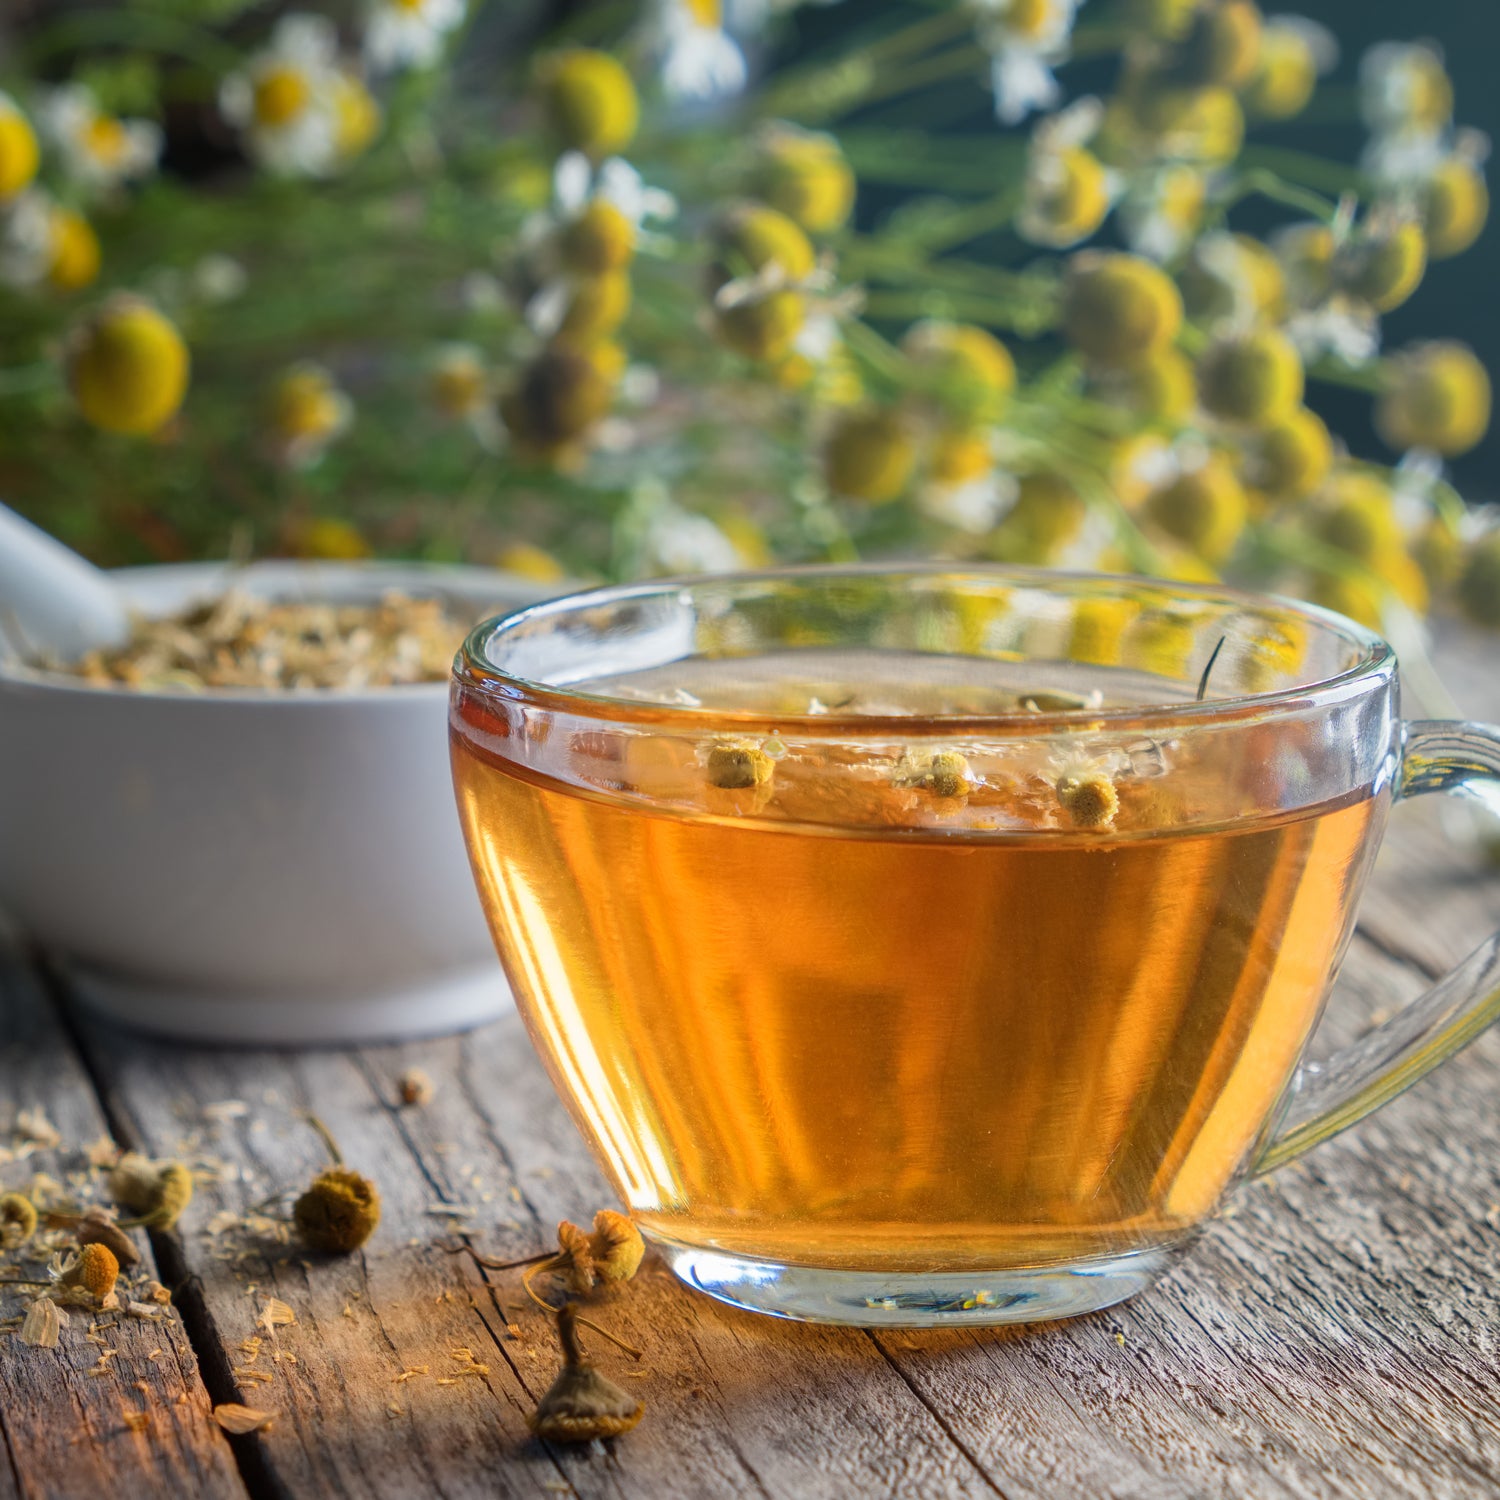 Chamomile tea, an inspiration for Chamomile Cotton, an odor eliminating scented candle from Tuscany Candle's Serene Clean® collection of scented candles and wax melt bars